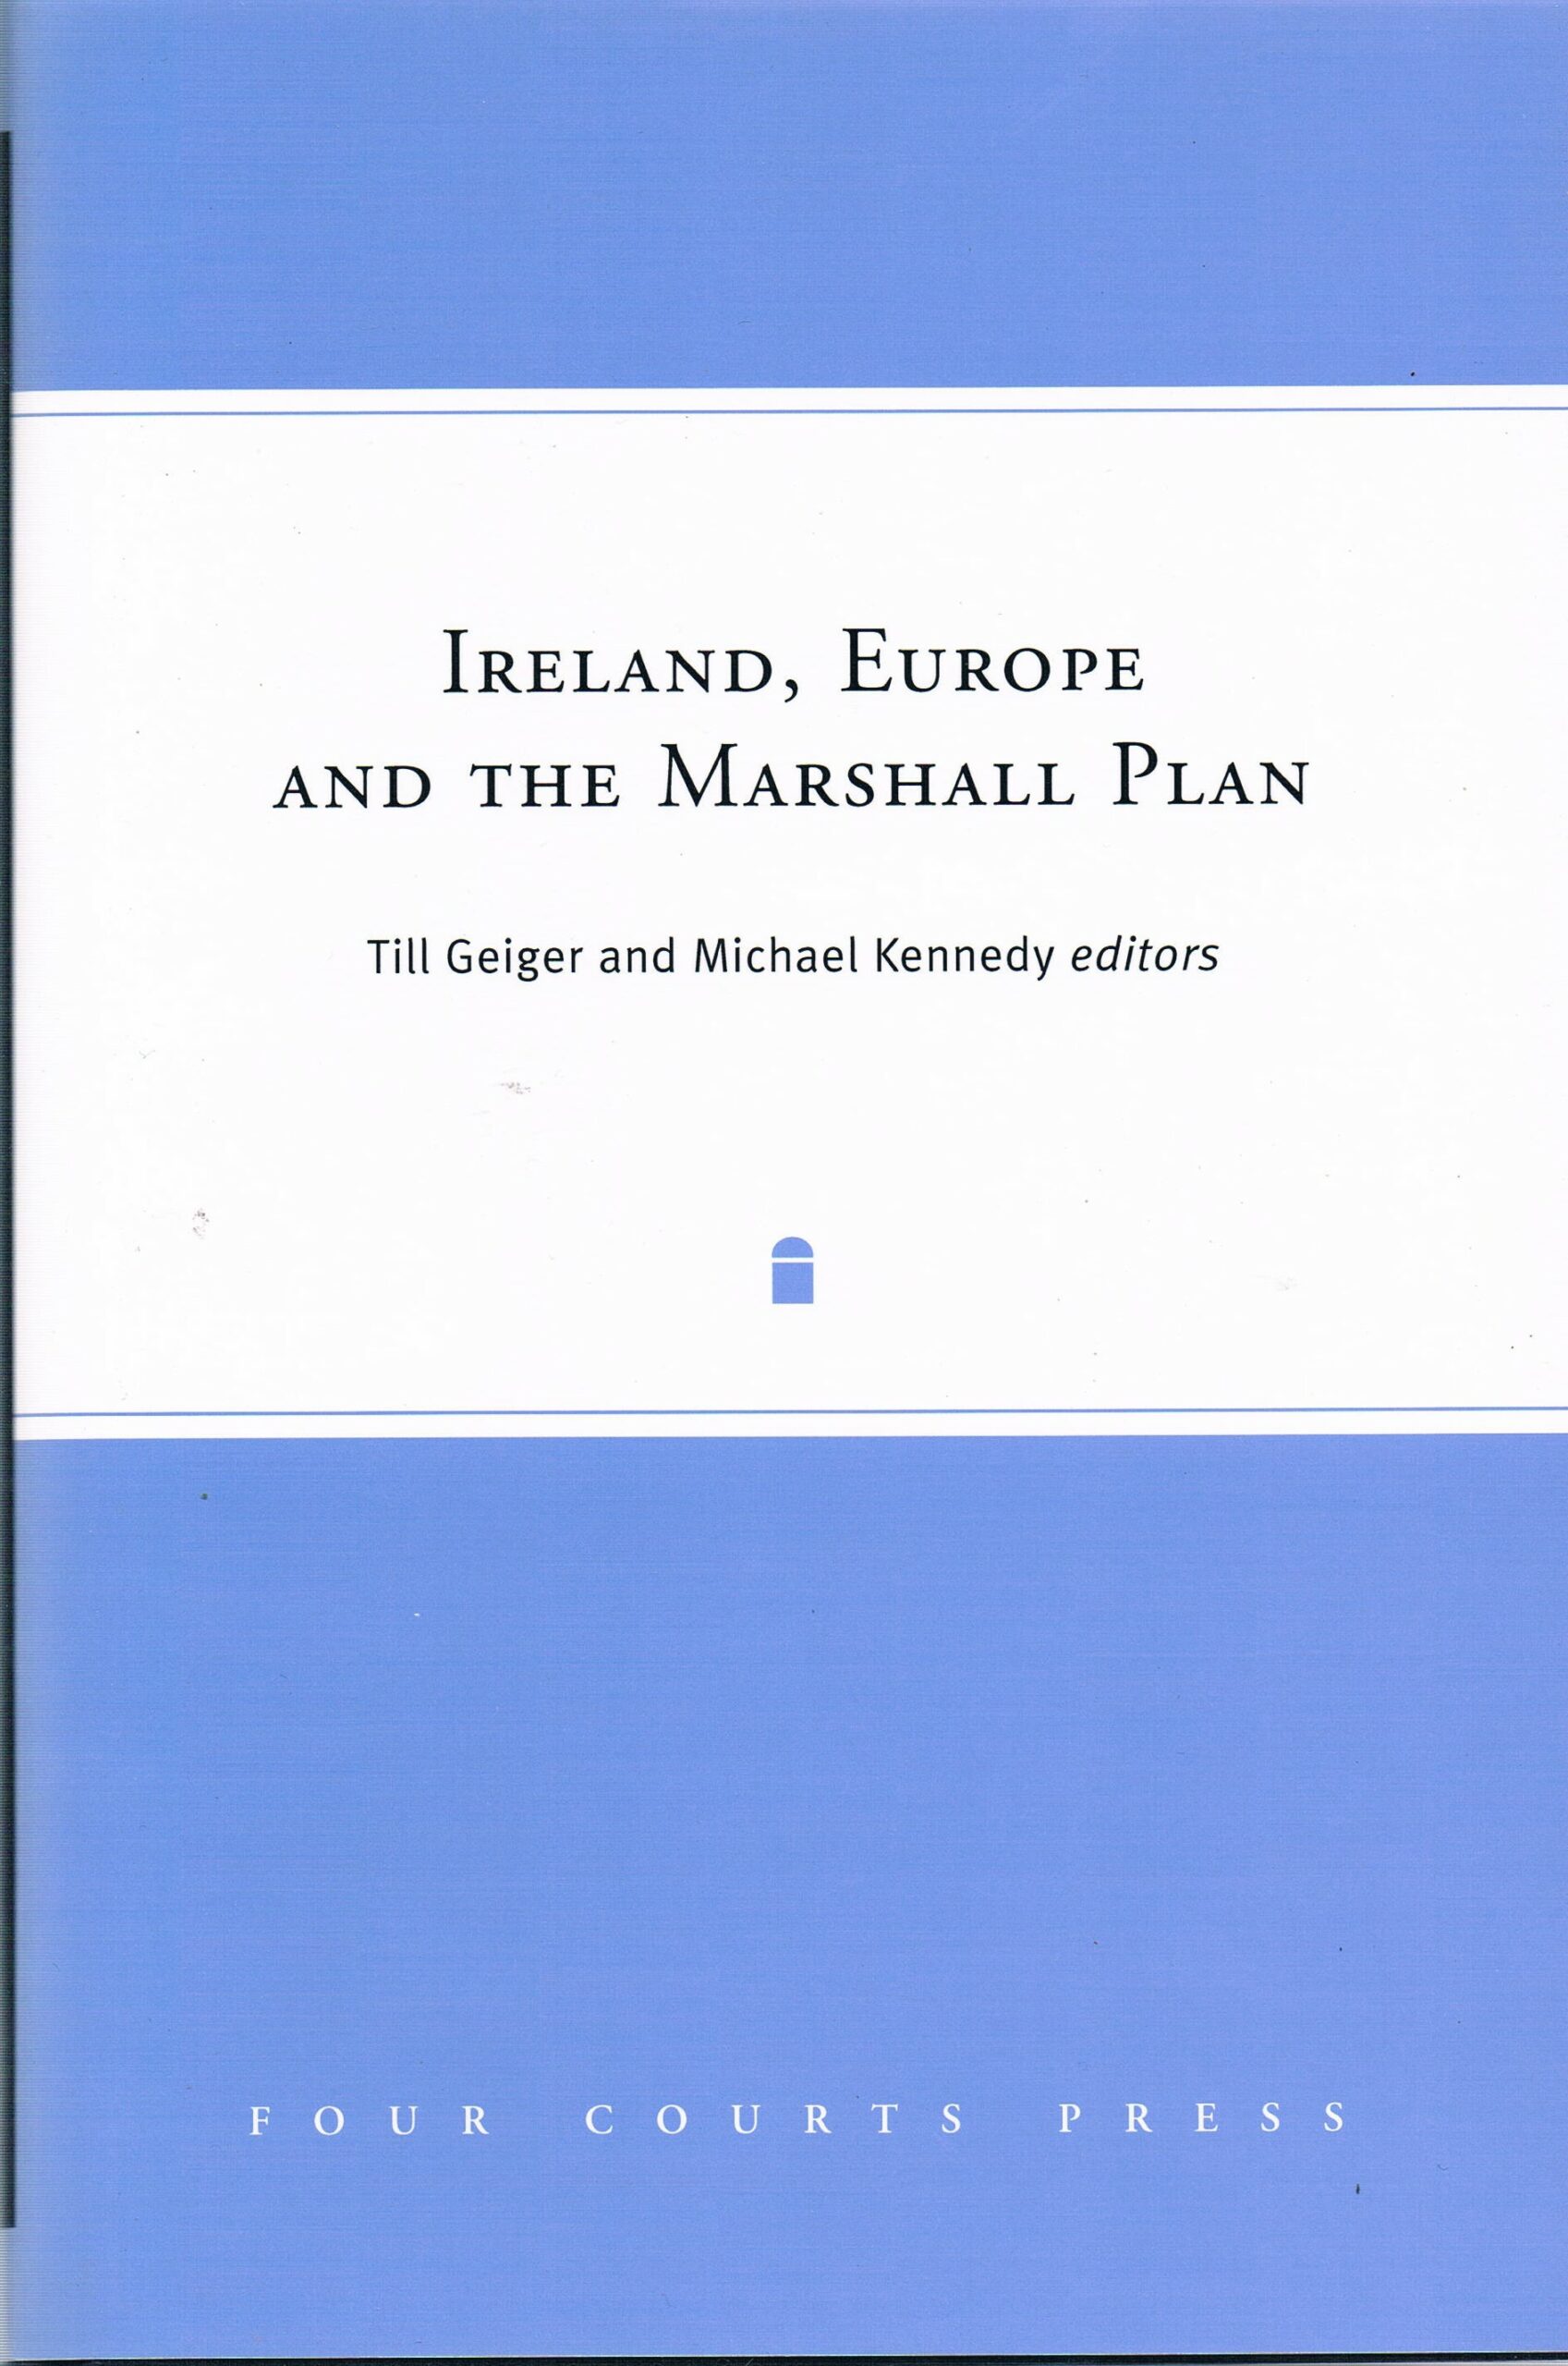 Ireland, Europe and the Marshall Plan by Till Geiger and Michael Kennedy